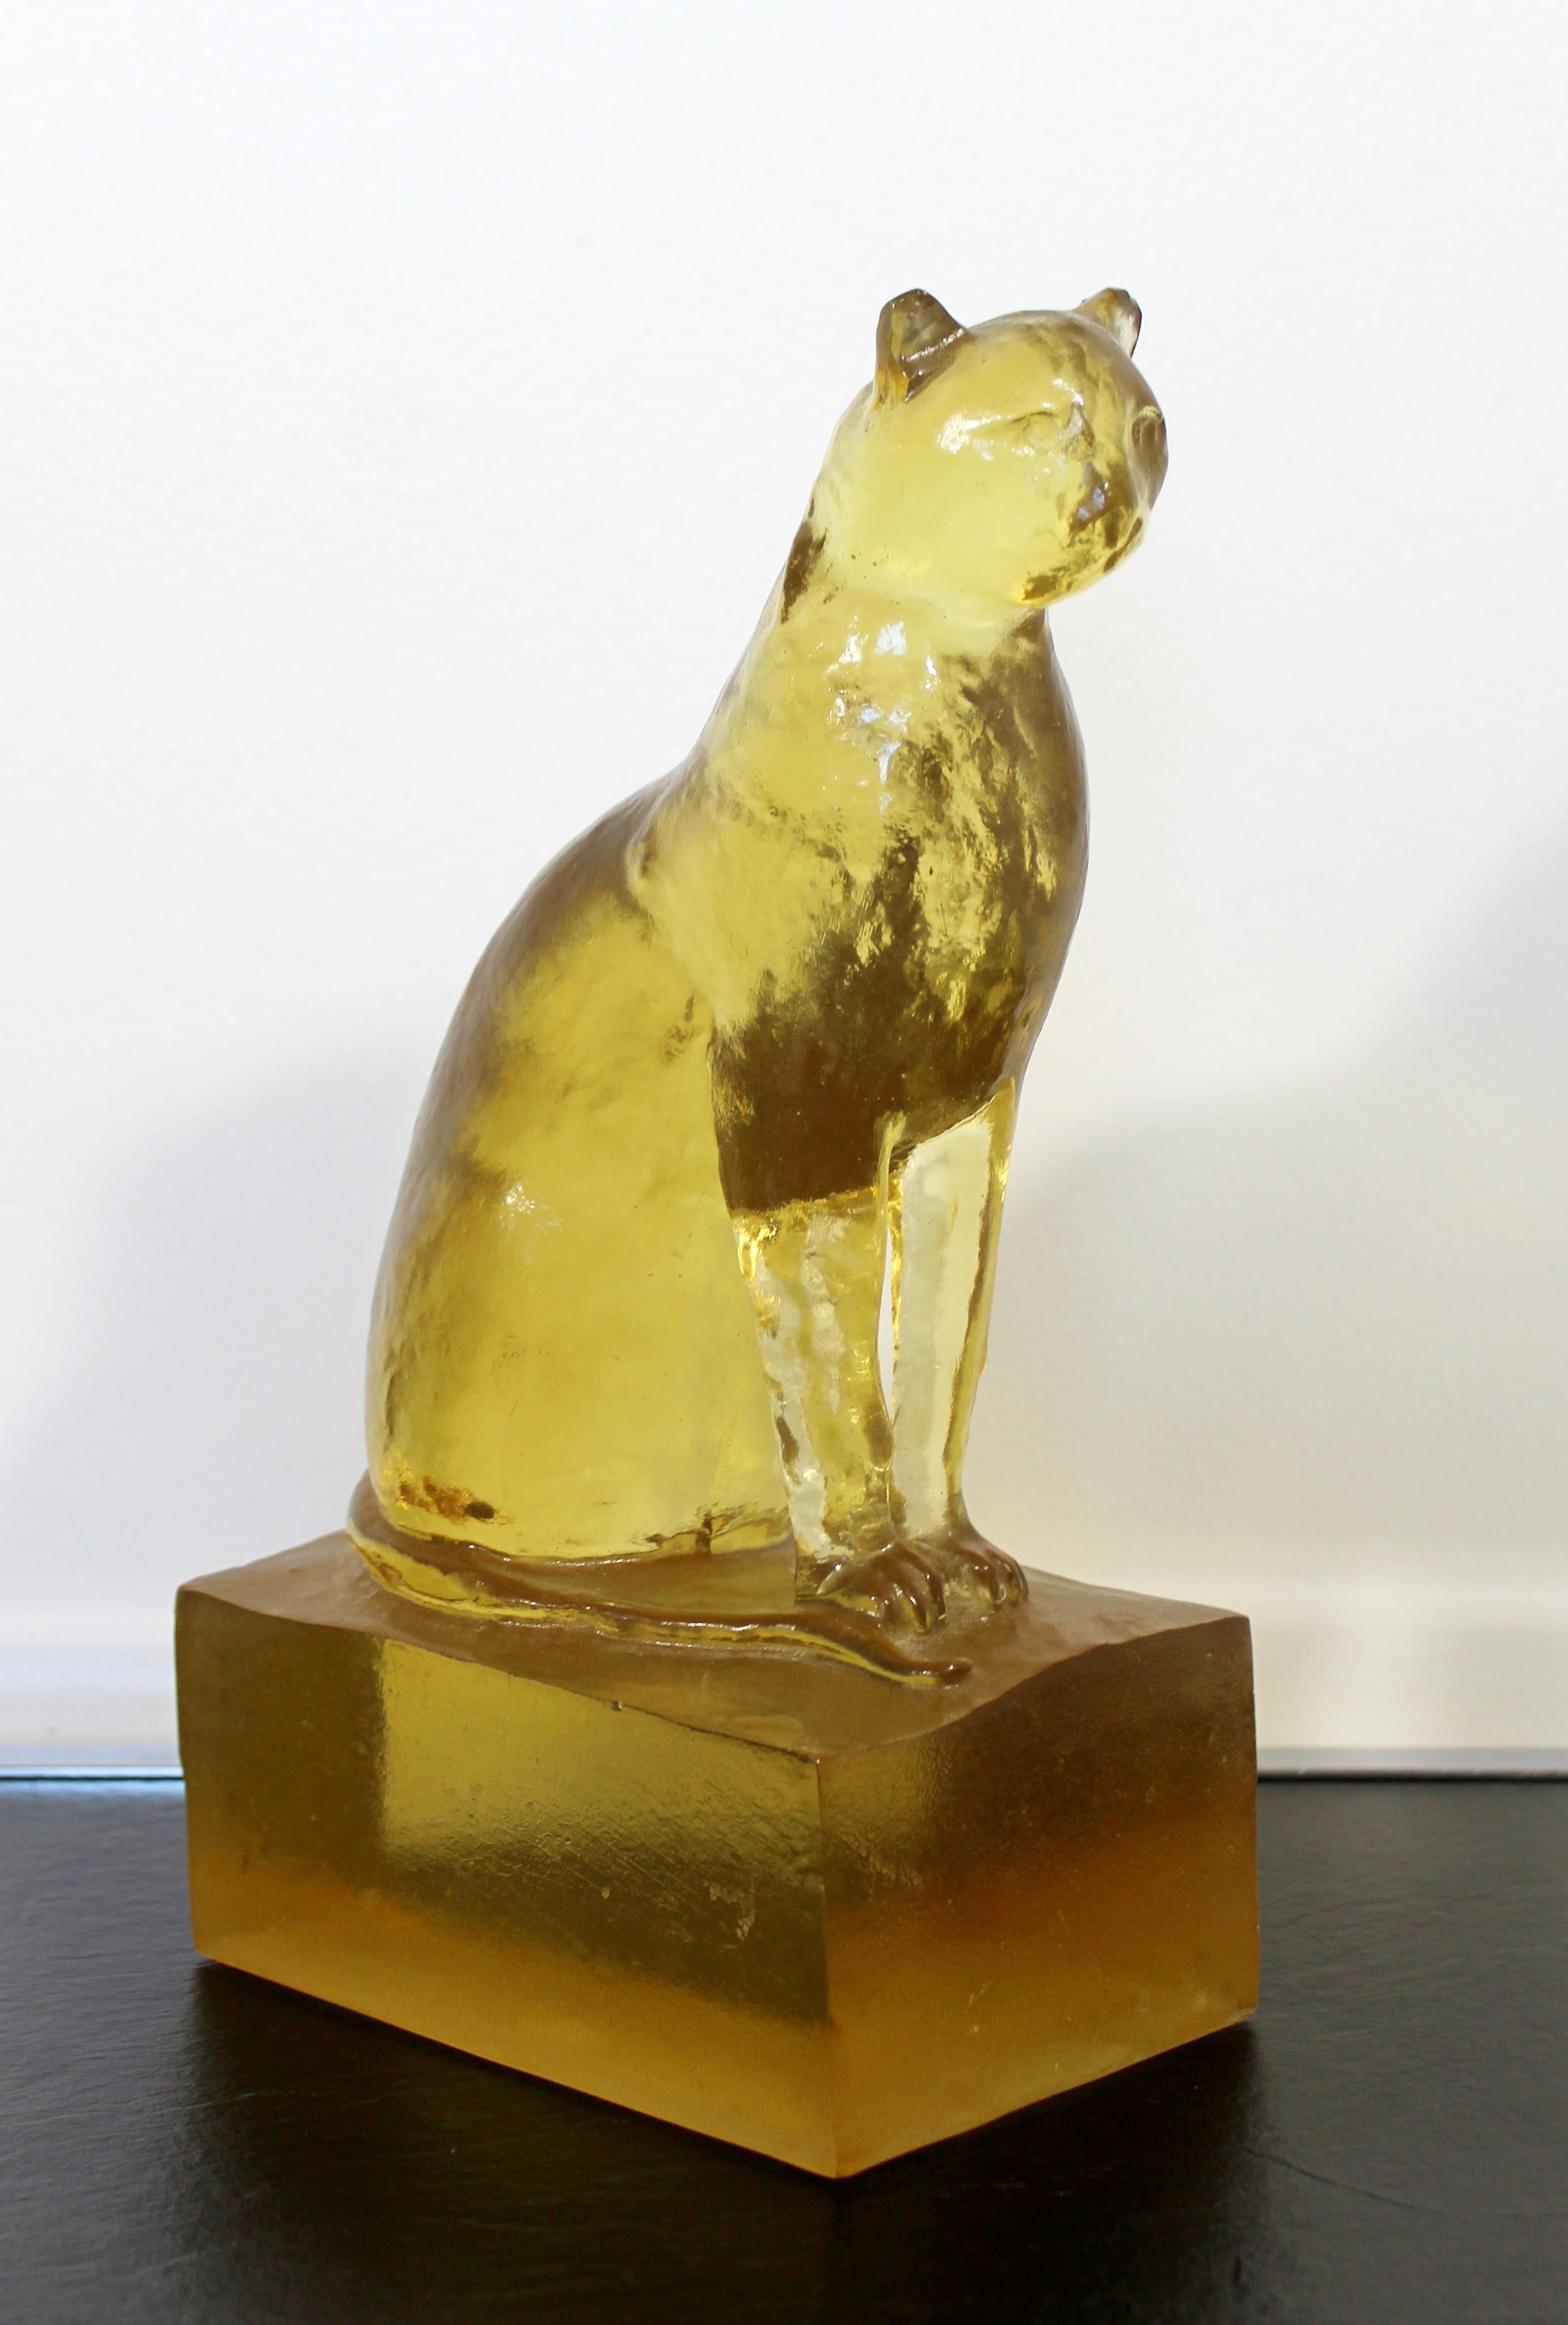 Art Deco Modern Dorothy Thorpe Resin Cat Sphinx Table Sculpture, 1940s Yellow In Good Condition In Keego Harbor, MI